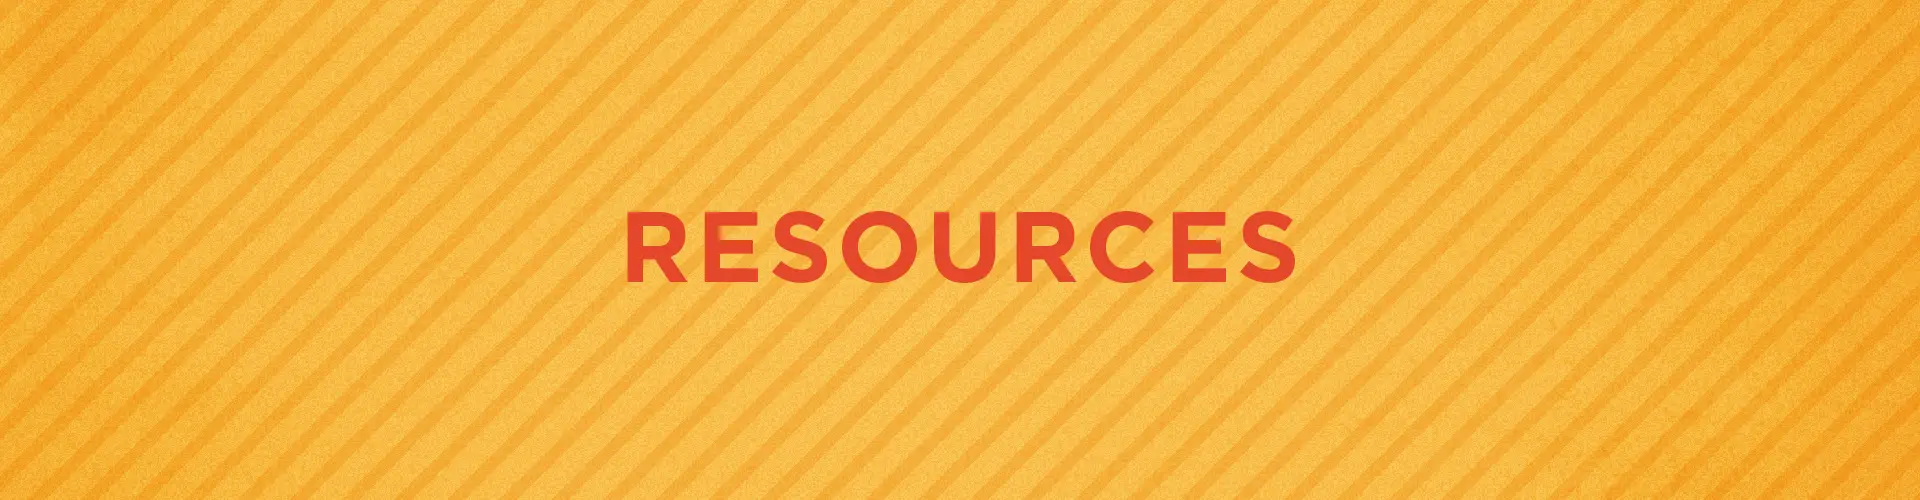 Resources Background-01.png